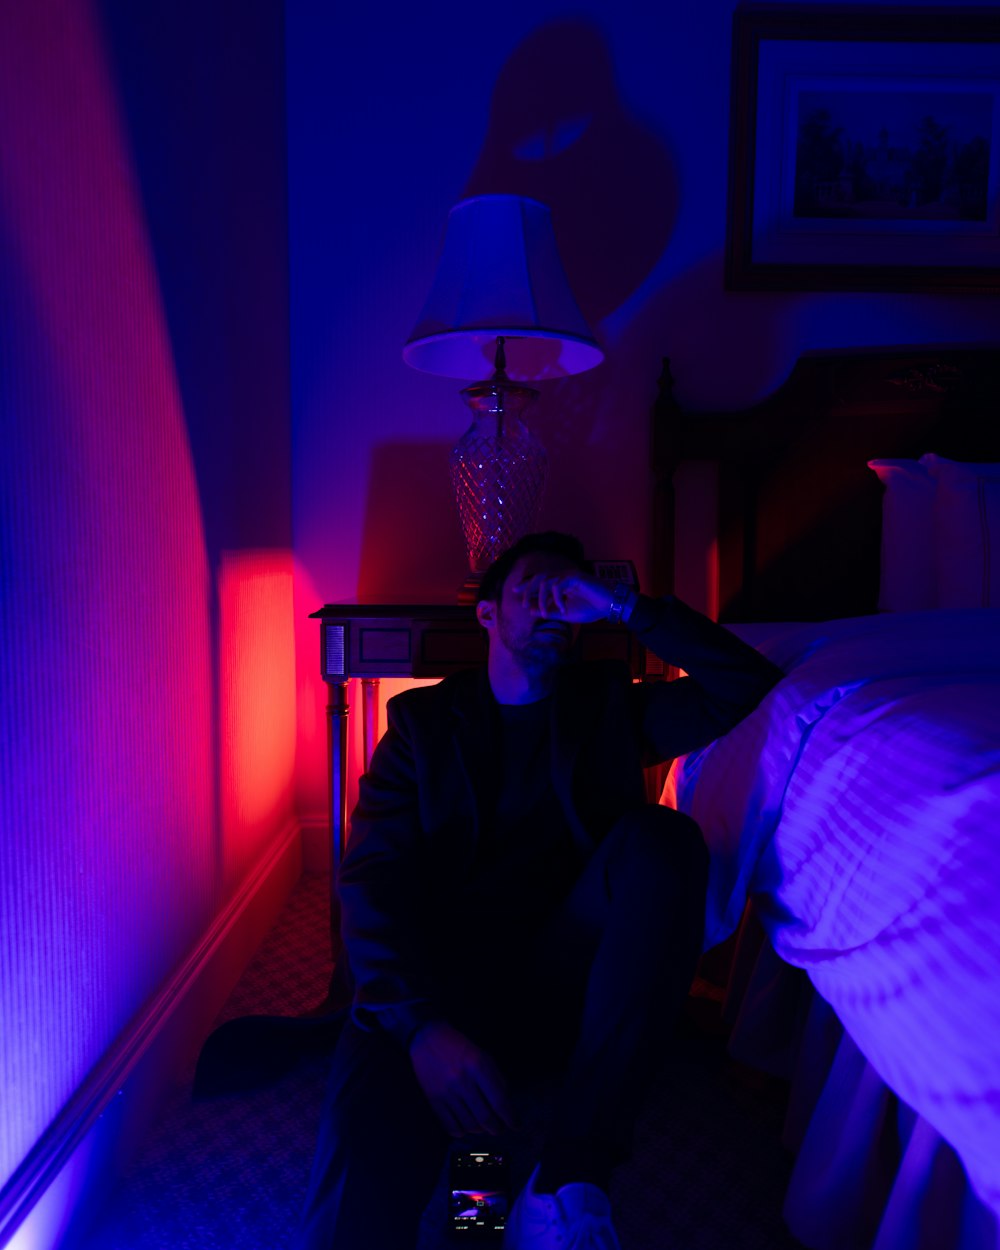 a man sitting on a bed in a dark room